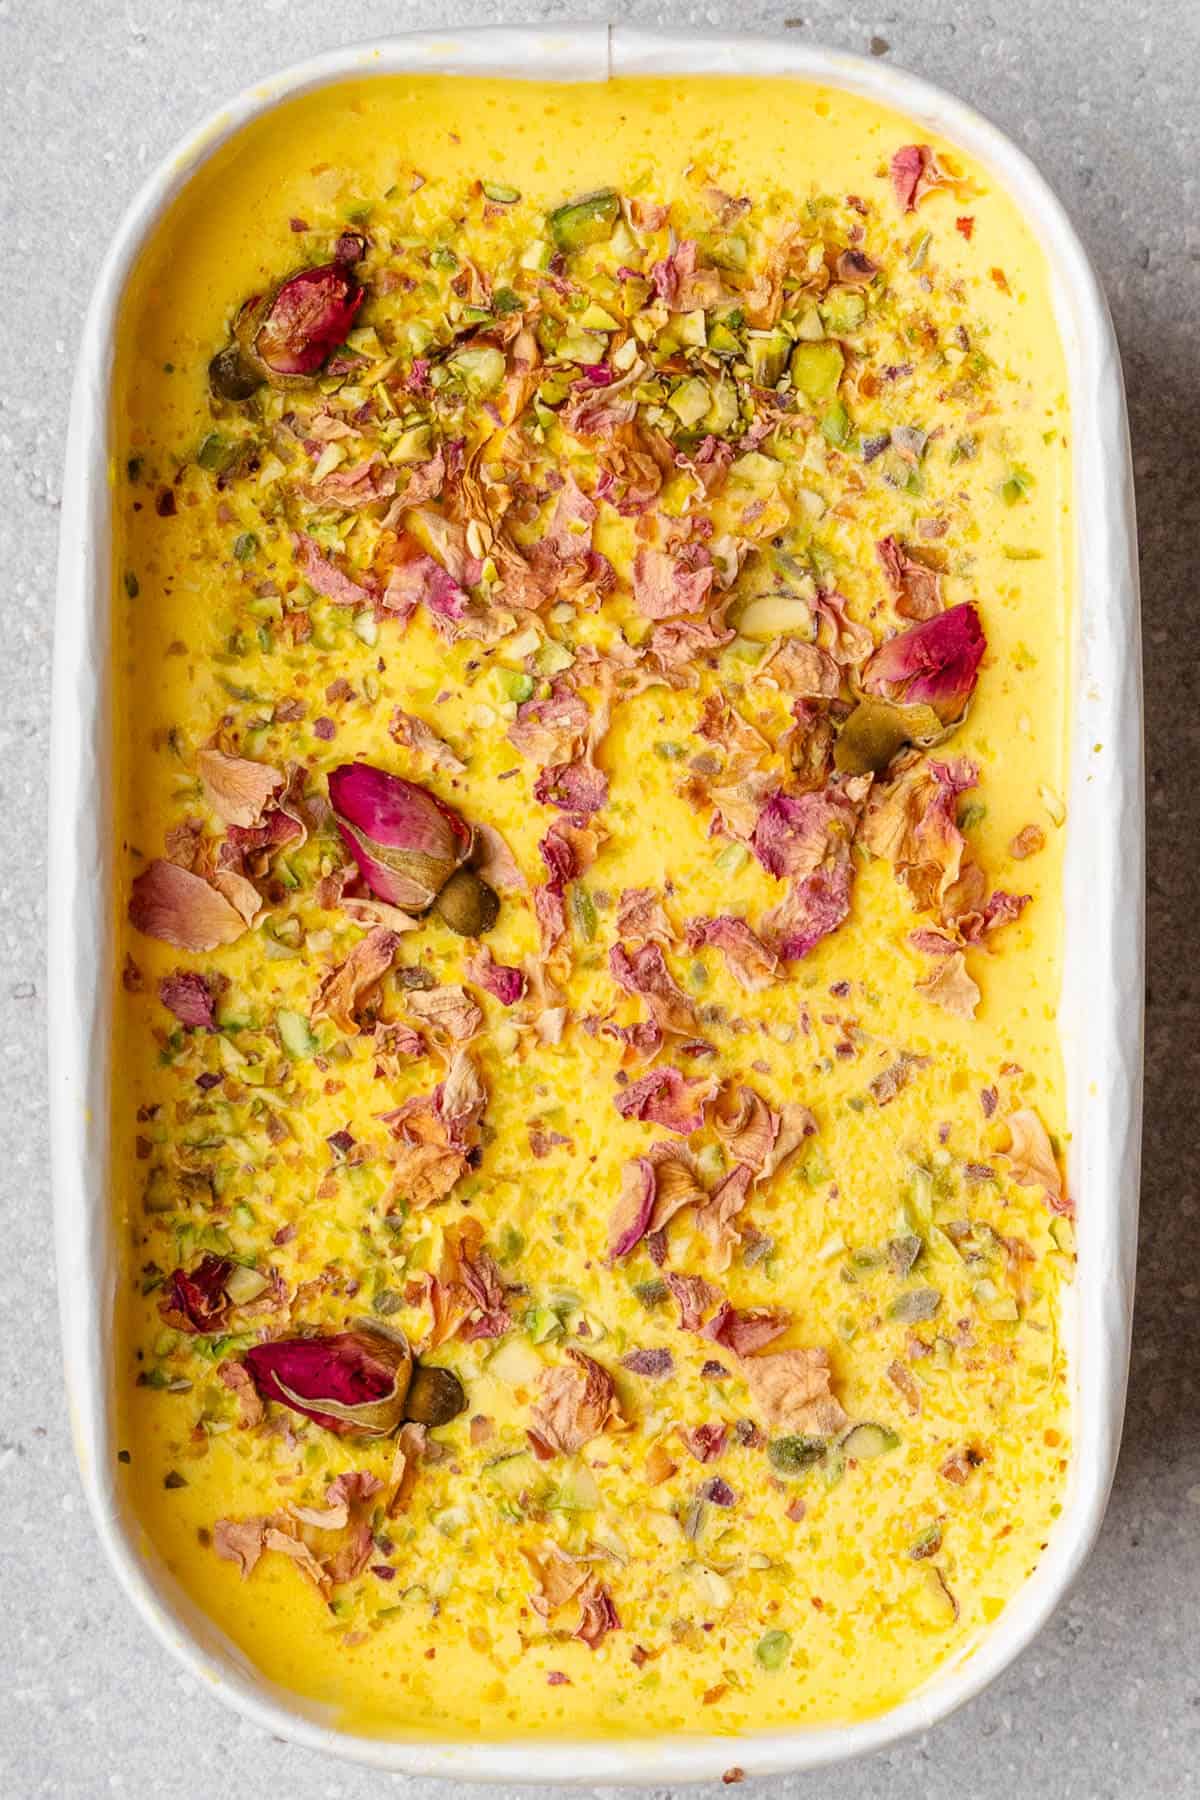 Tub of frozen Persian Ice cream topped with pistachios and rose petals